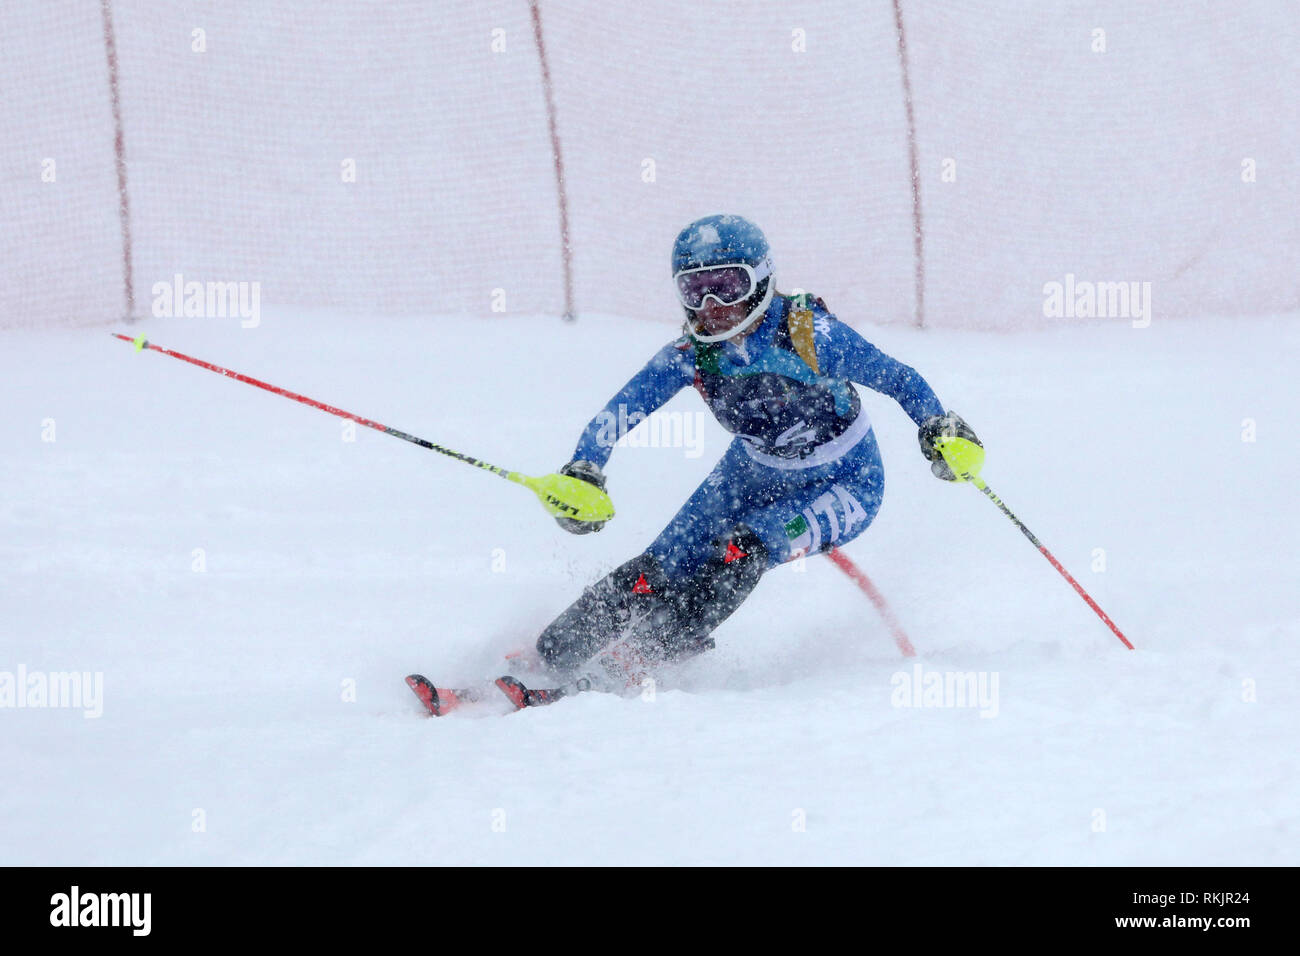 Sarajevo, Bosnia and Herzegovina (BiH). 11th Feb, 2019. Italy's Annette Belfrond competes during the women's giant slalom competition at the European Youth Olympic Festival (EYOF 2019) on Mountain Jahorina, near Sarajevo, Bosnia and Herzegovina (BiH), on Feb. 11, 2019. Credit: Nedim Grabovica/Xinhua/Alamy Live News Stock Photo